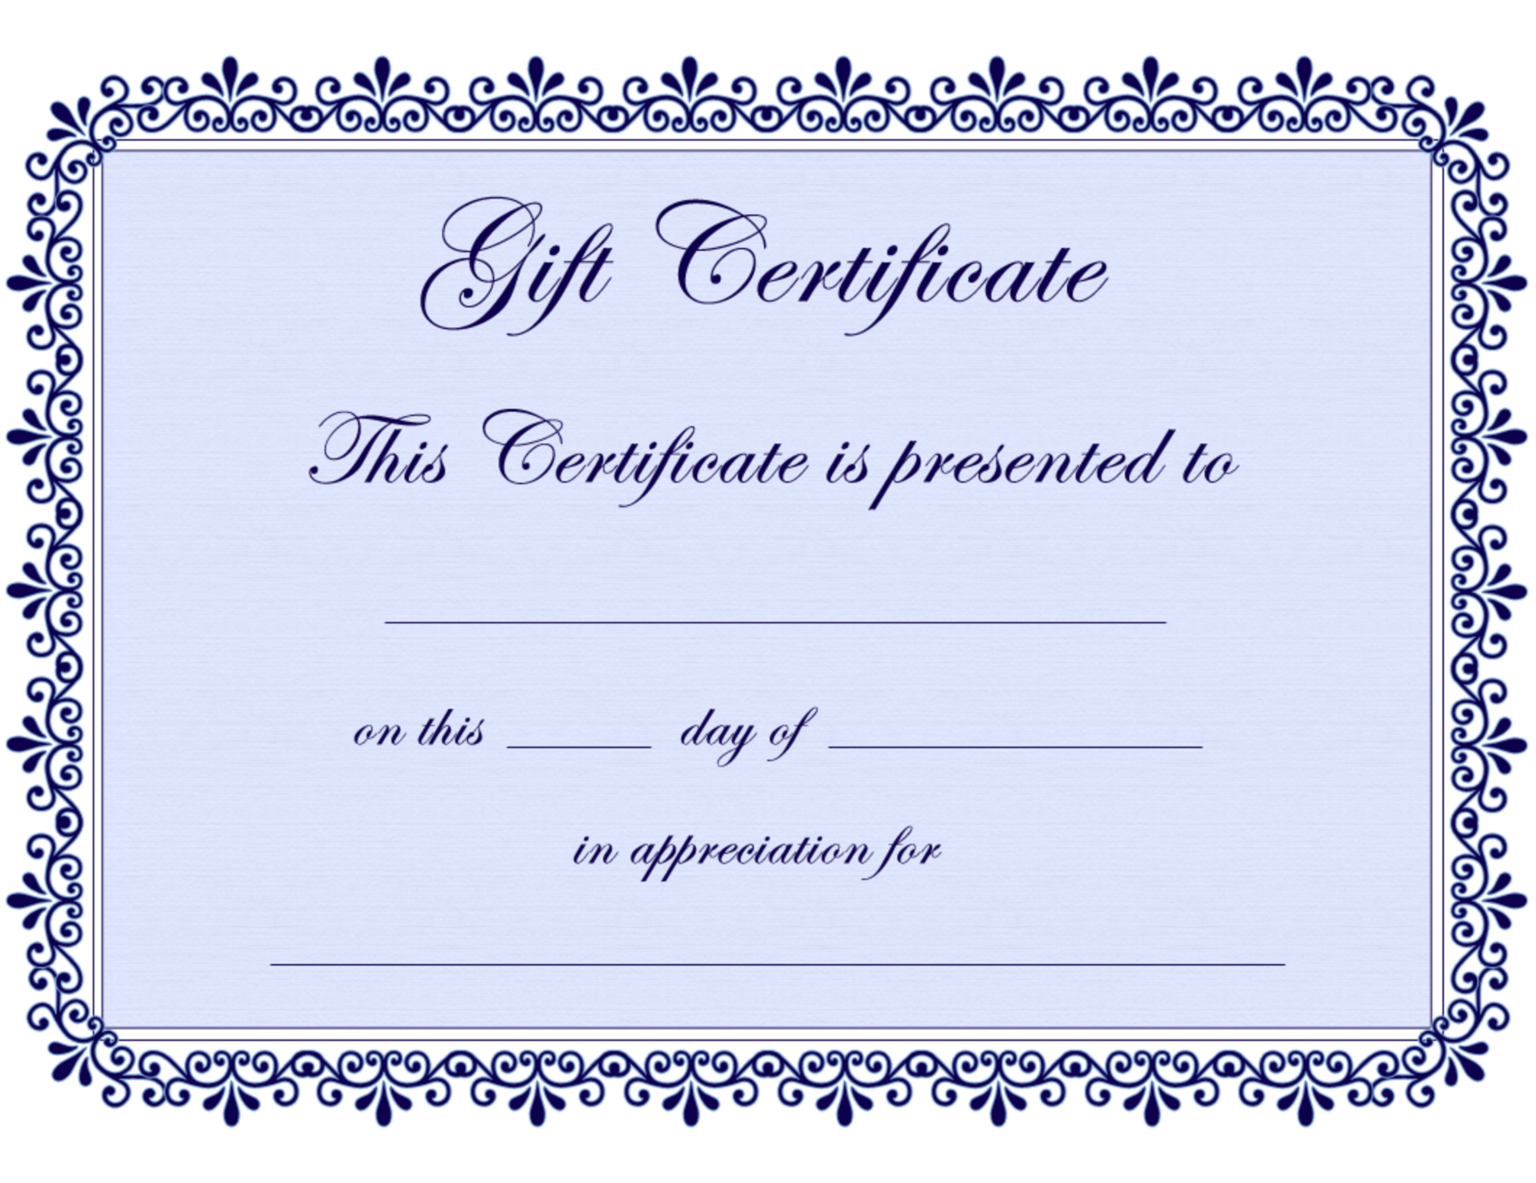 free gift certificate template in word